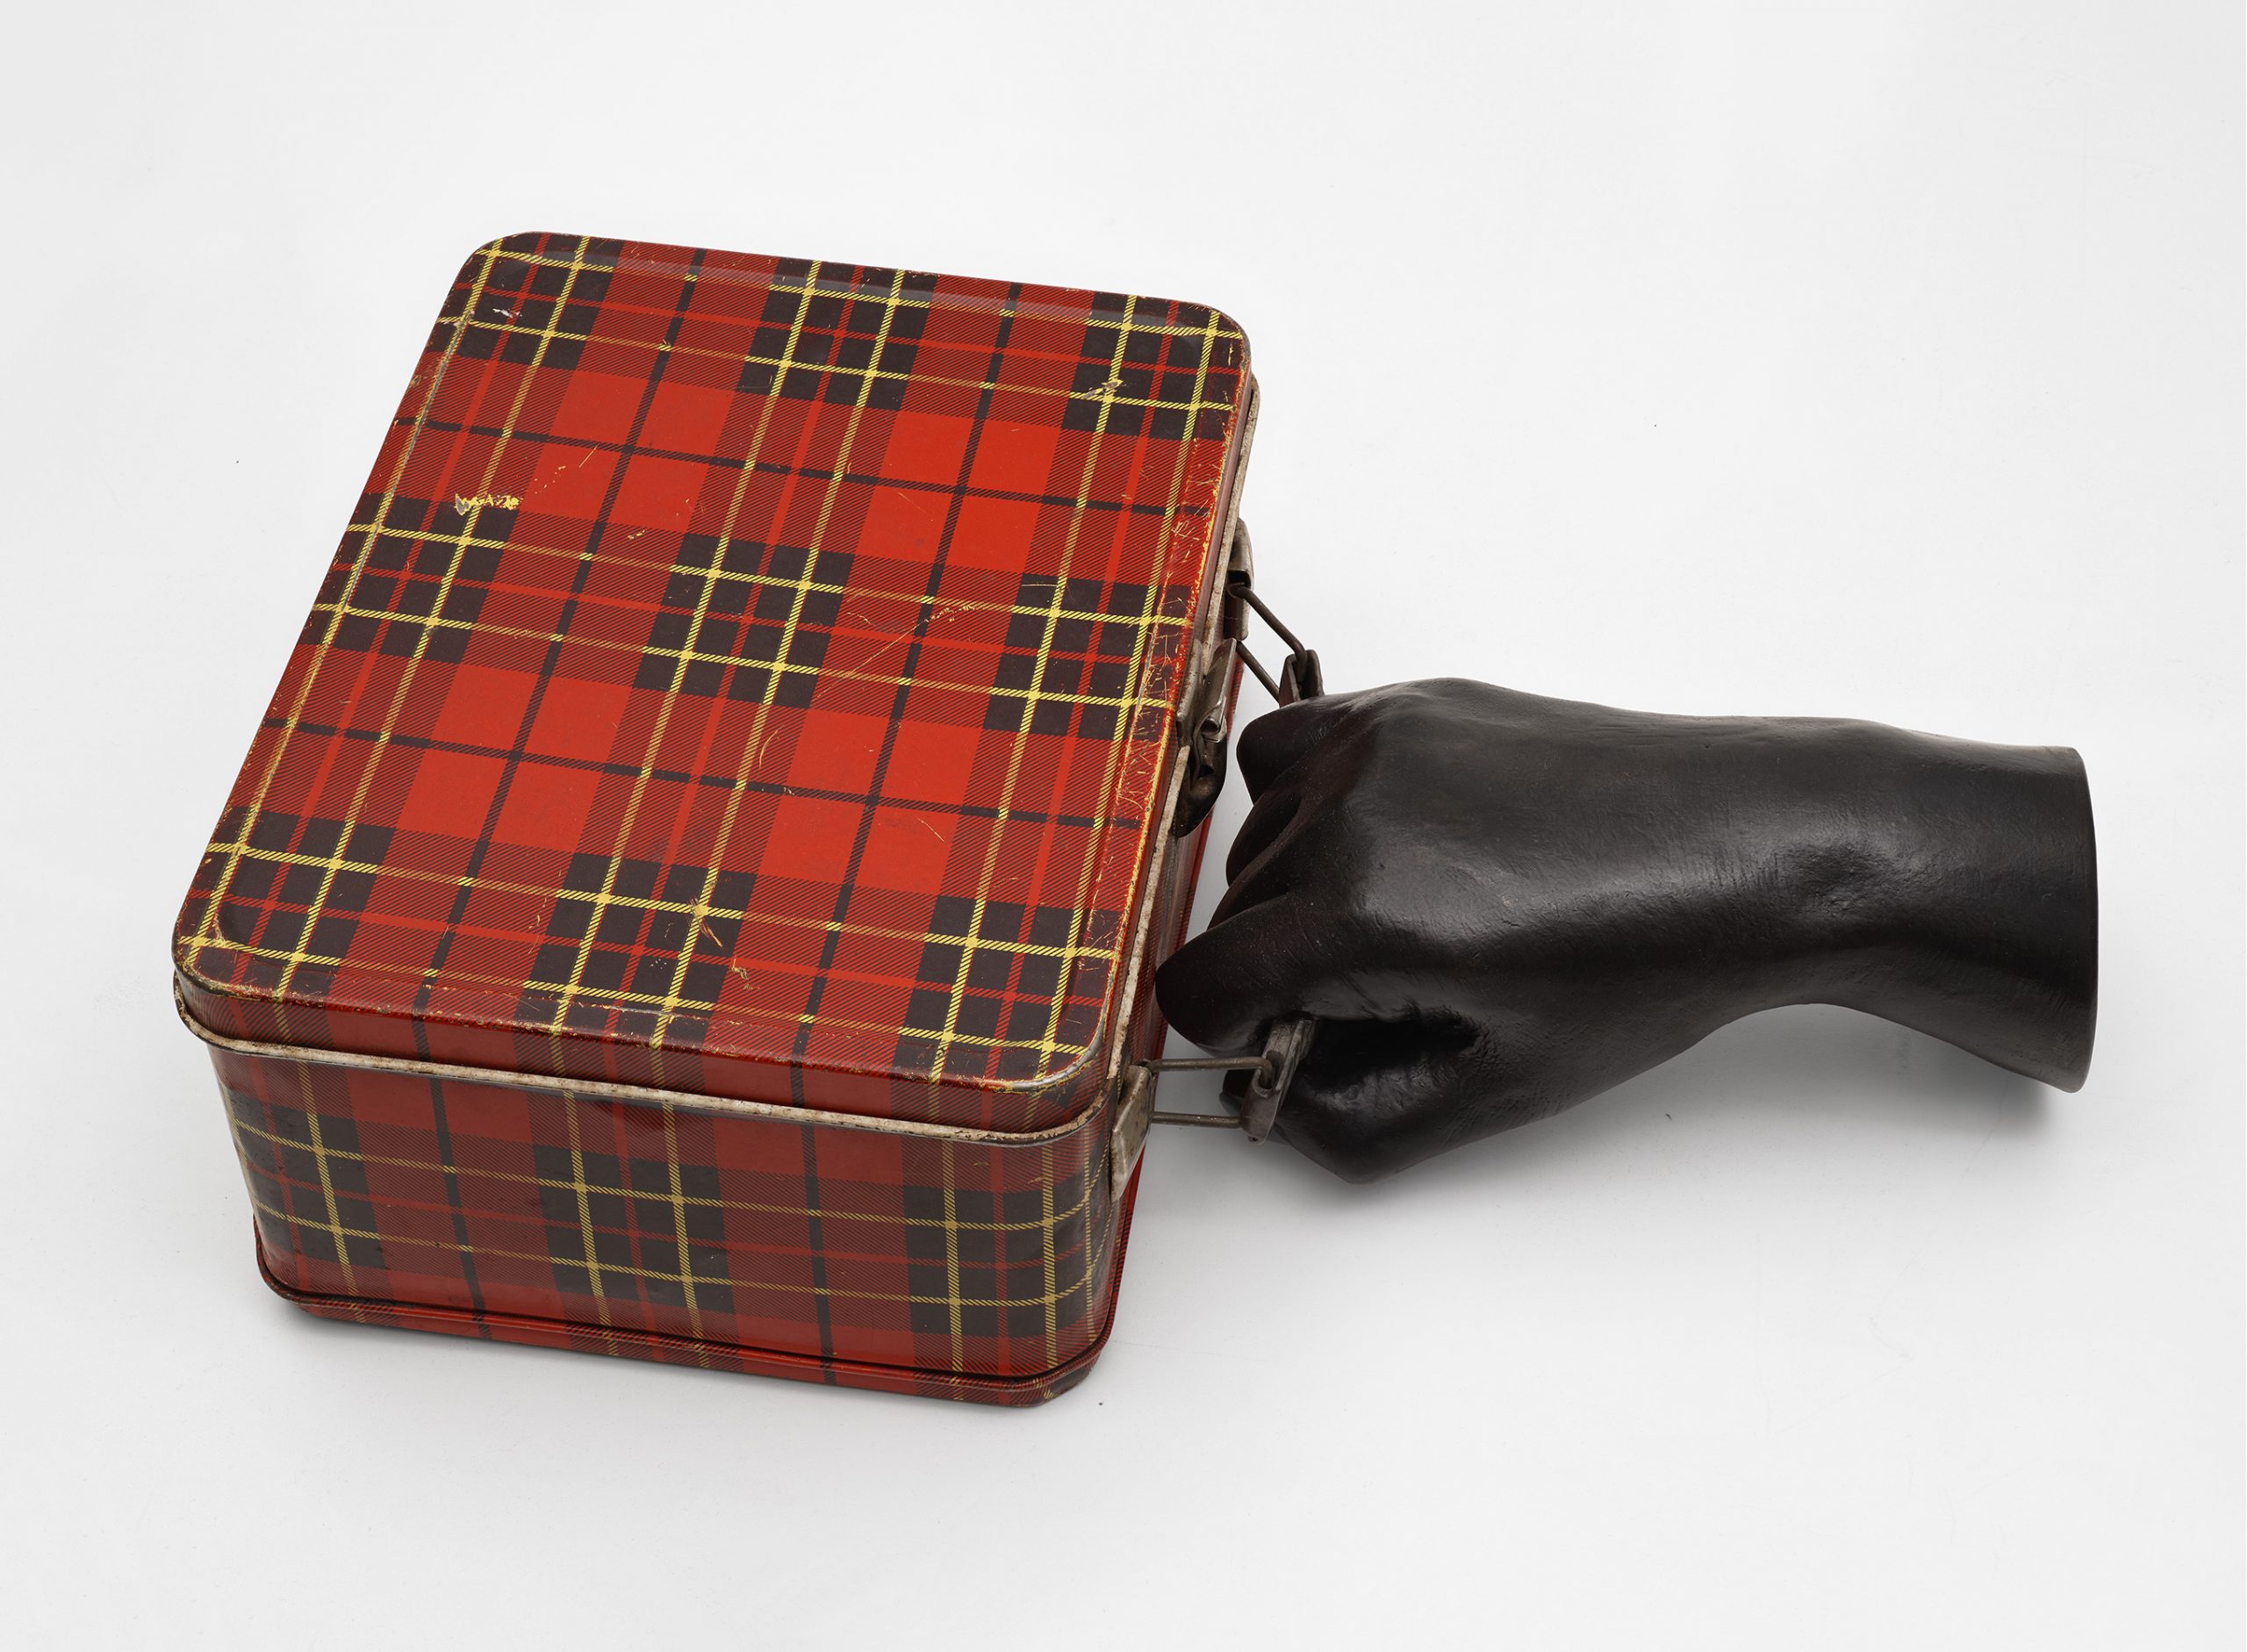 image of cast bronze hand in black, ending just above the wrist, gripping handle of square metal lunch box with red and green plaid design